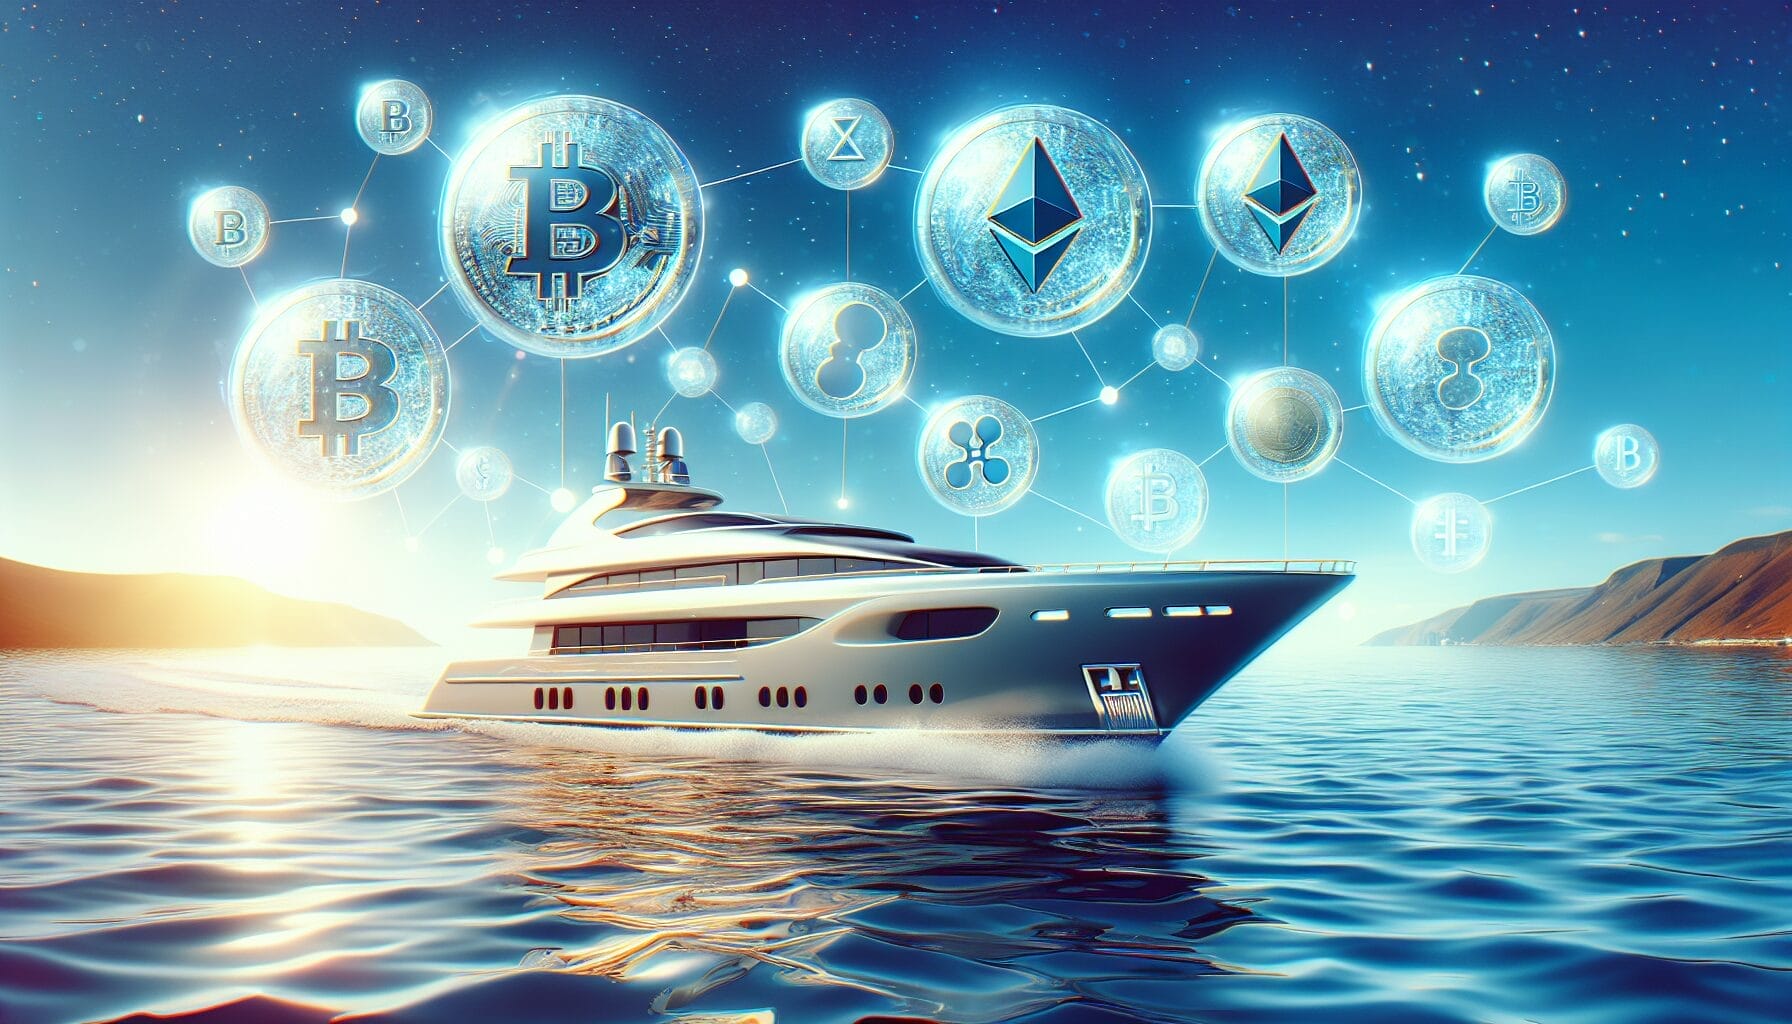 Charter yacht with bitcoin